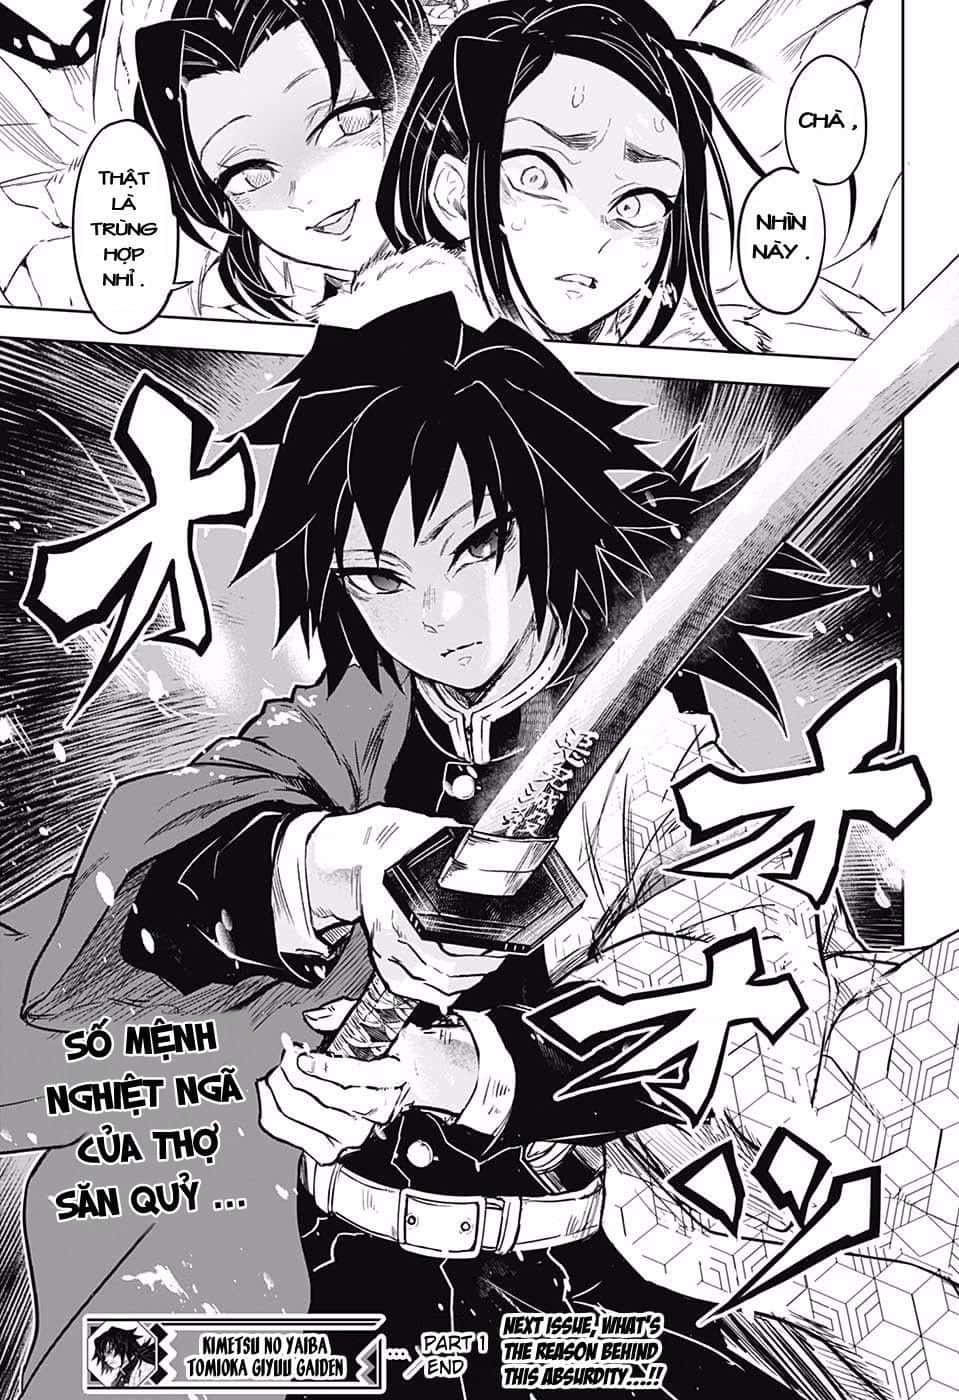 A Manga Page With Two Characters Holding Swords Wallpaper